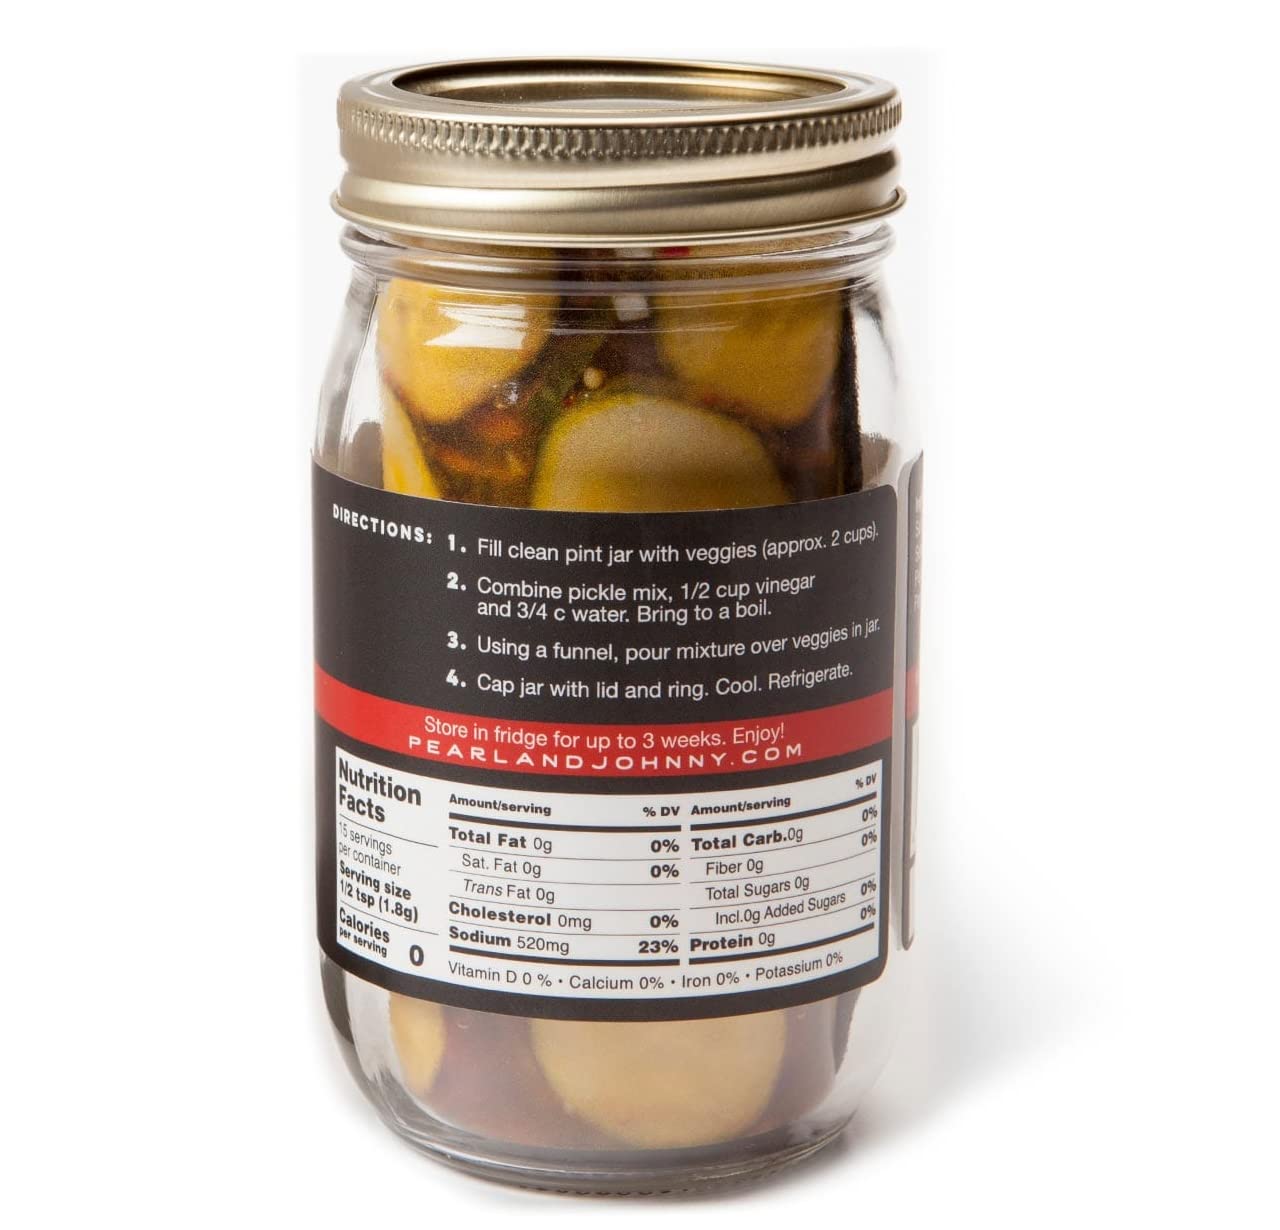 back view of Jar of Pearl & Johnny's fire and spice Pickle Kit